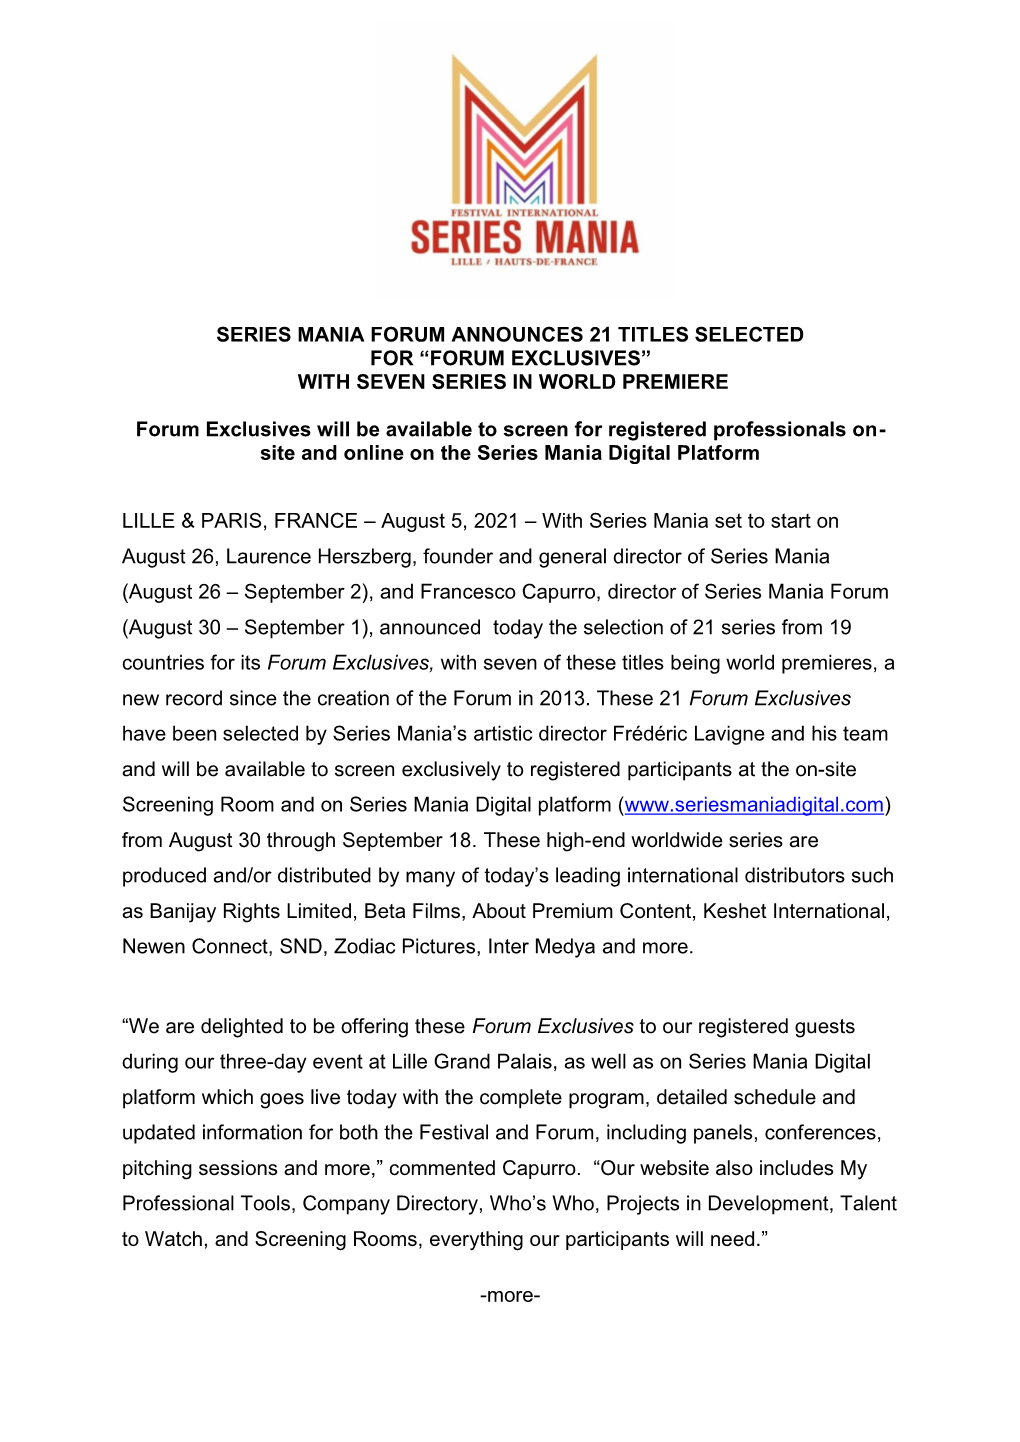 Series Mania Forum Announces 21 Titles Selected for “Forum Exclusives” with Seven Series in World Premiere